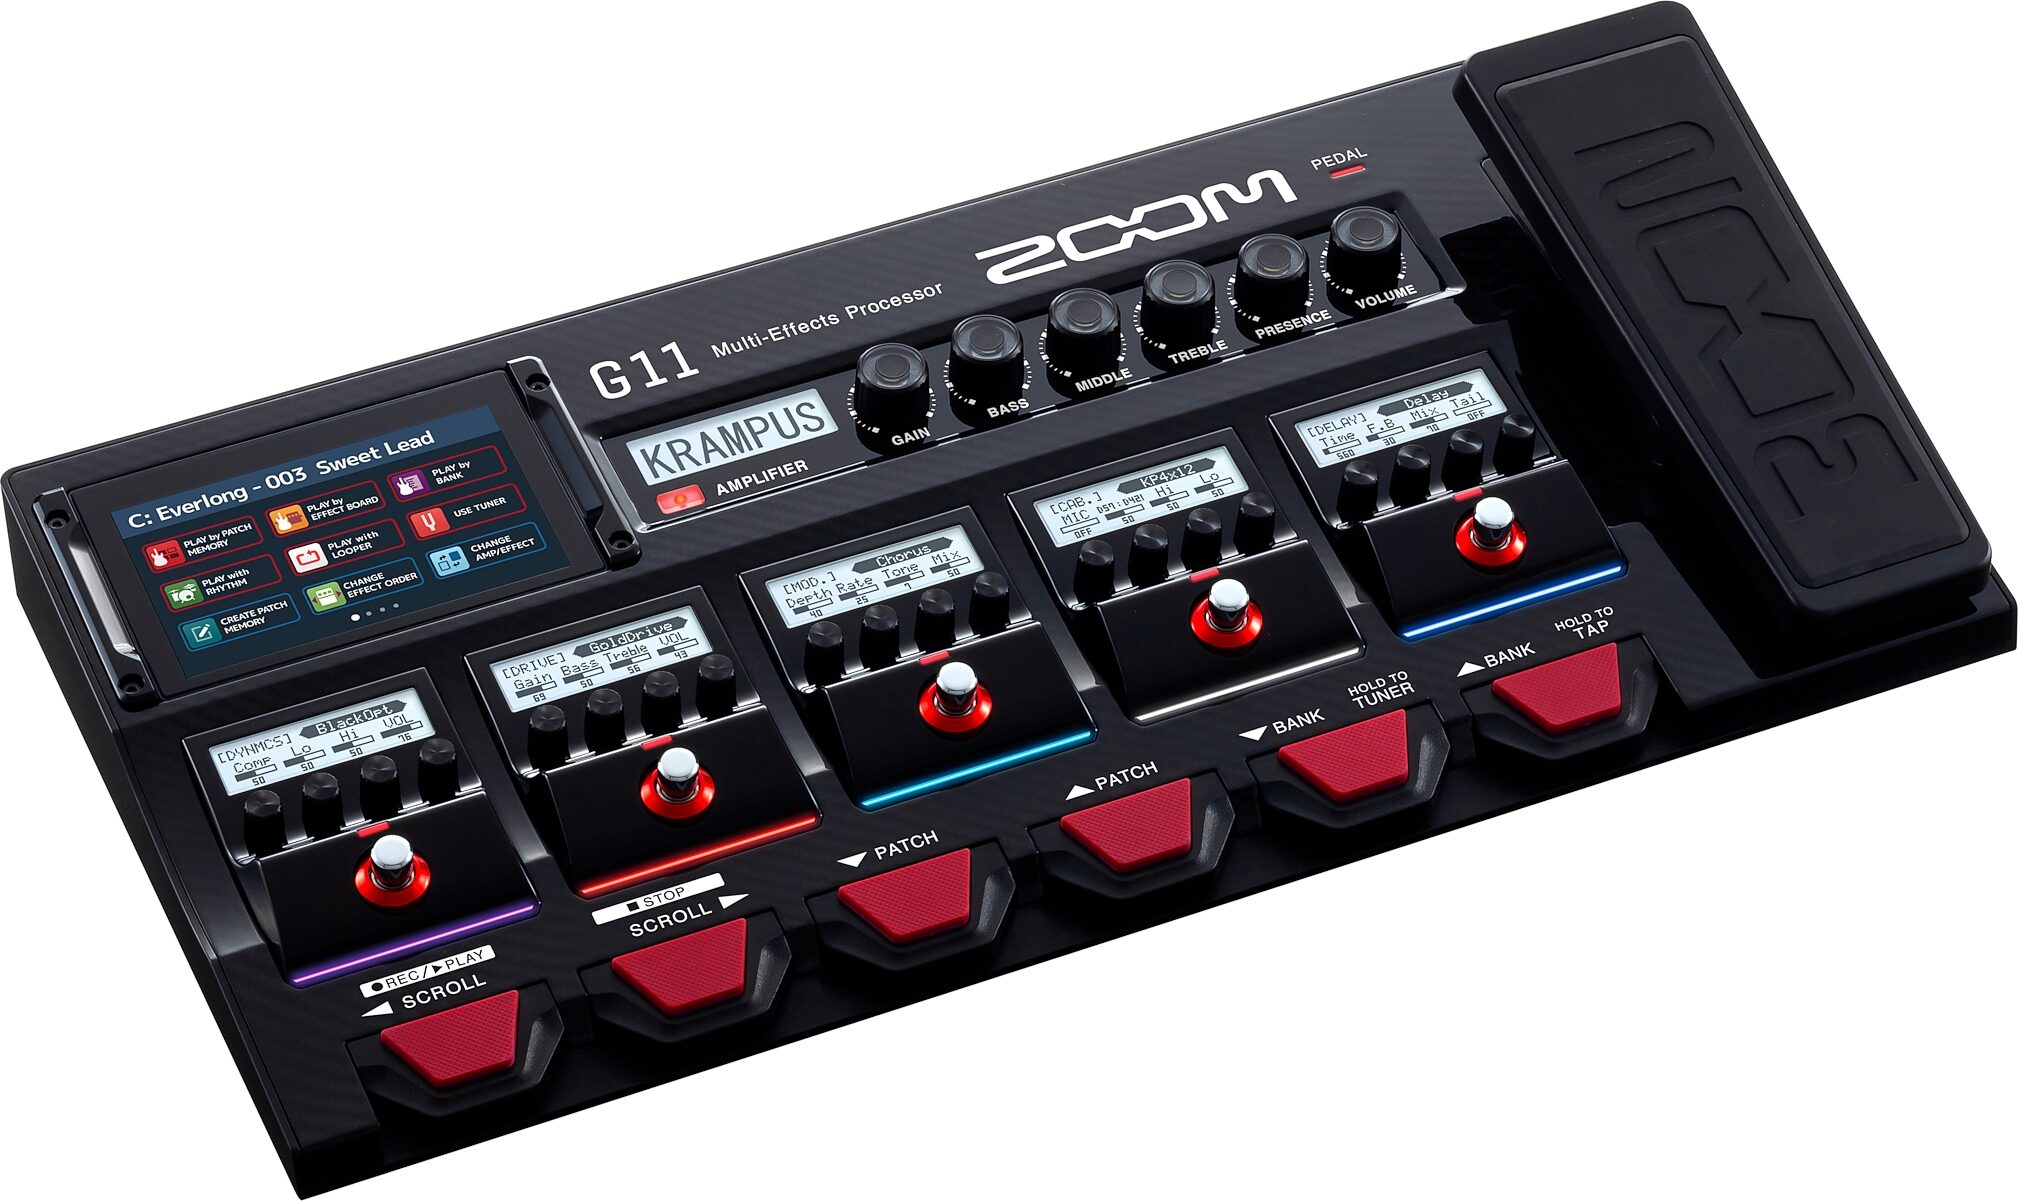 Zoom G11 Multi-Effects Processor zZounds